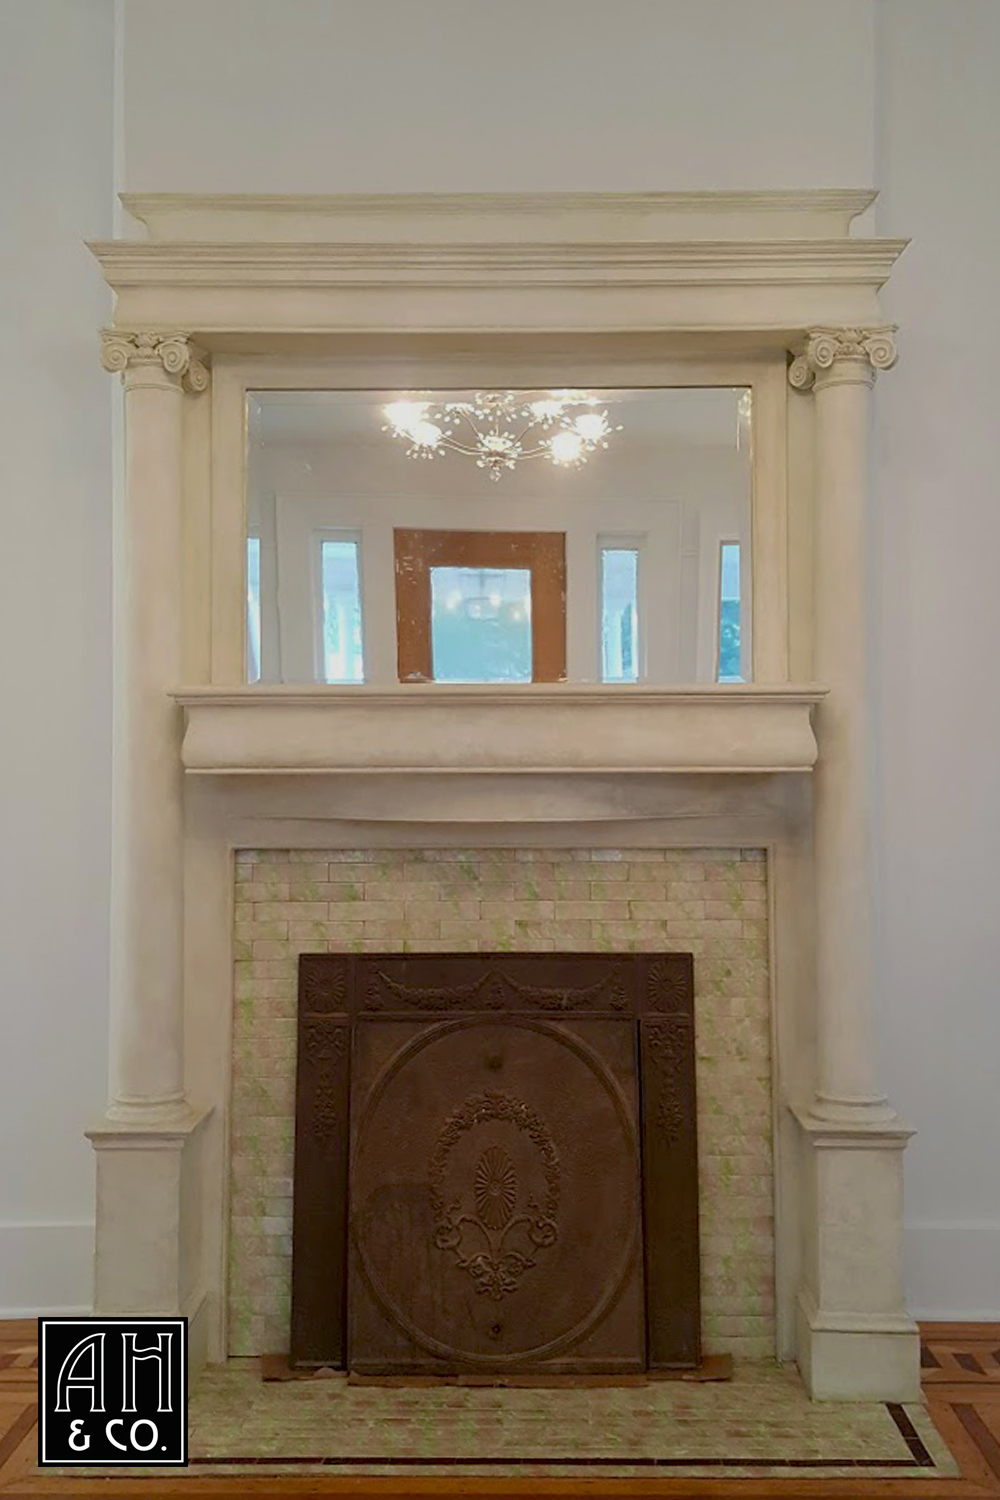 AFTER: THE MANTLE IS COMPLETE WITH A CUSTOM STONE TREATMENT